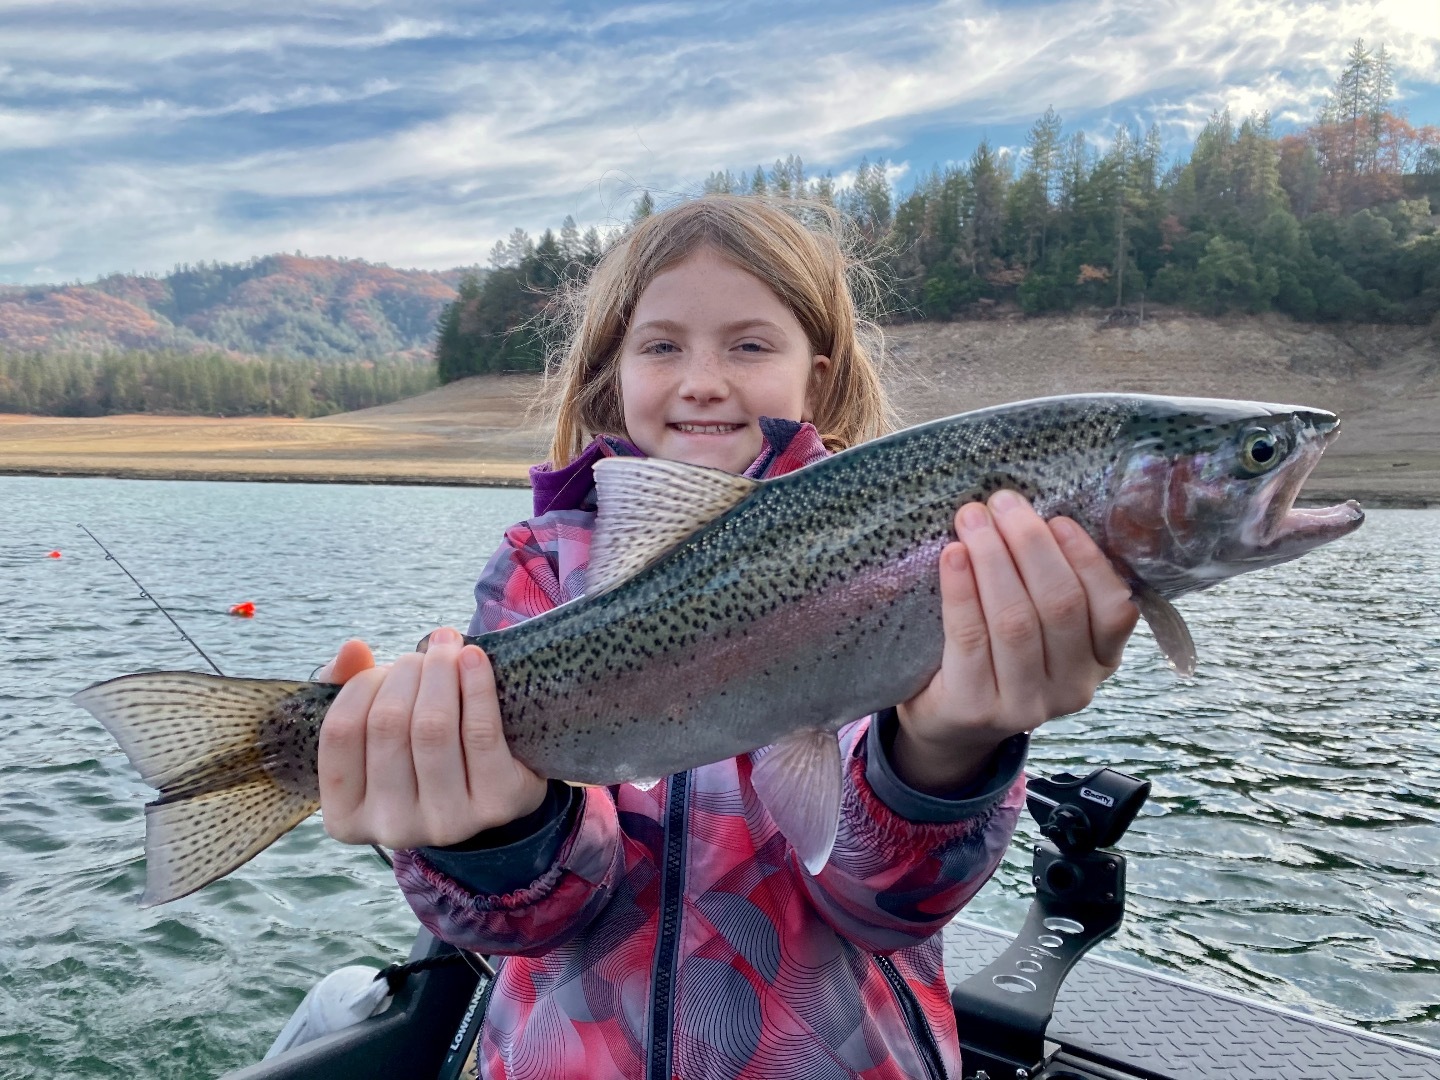 Solid trout bite on Shasta this week!